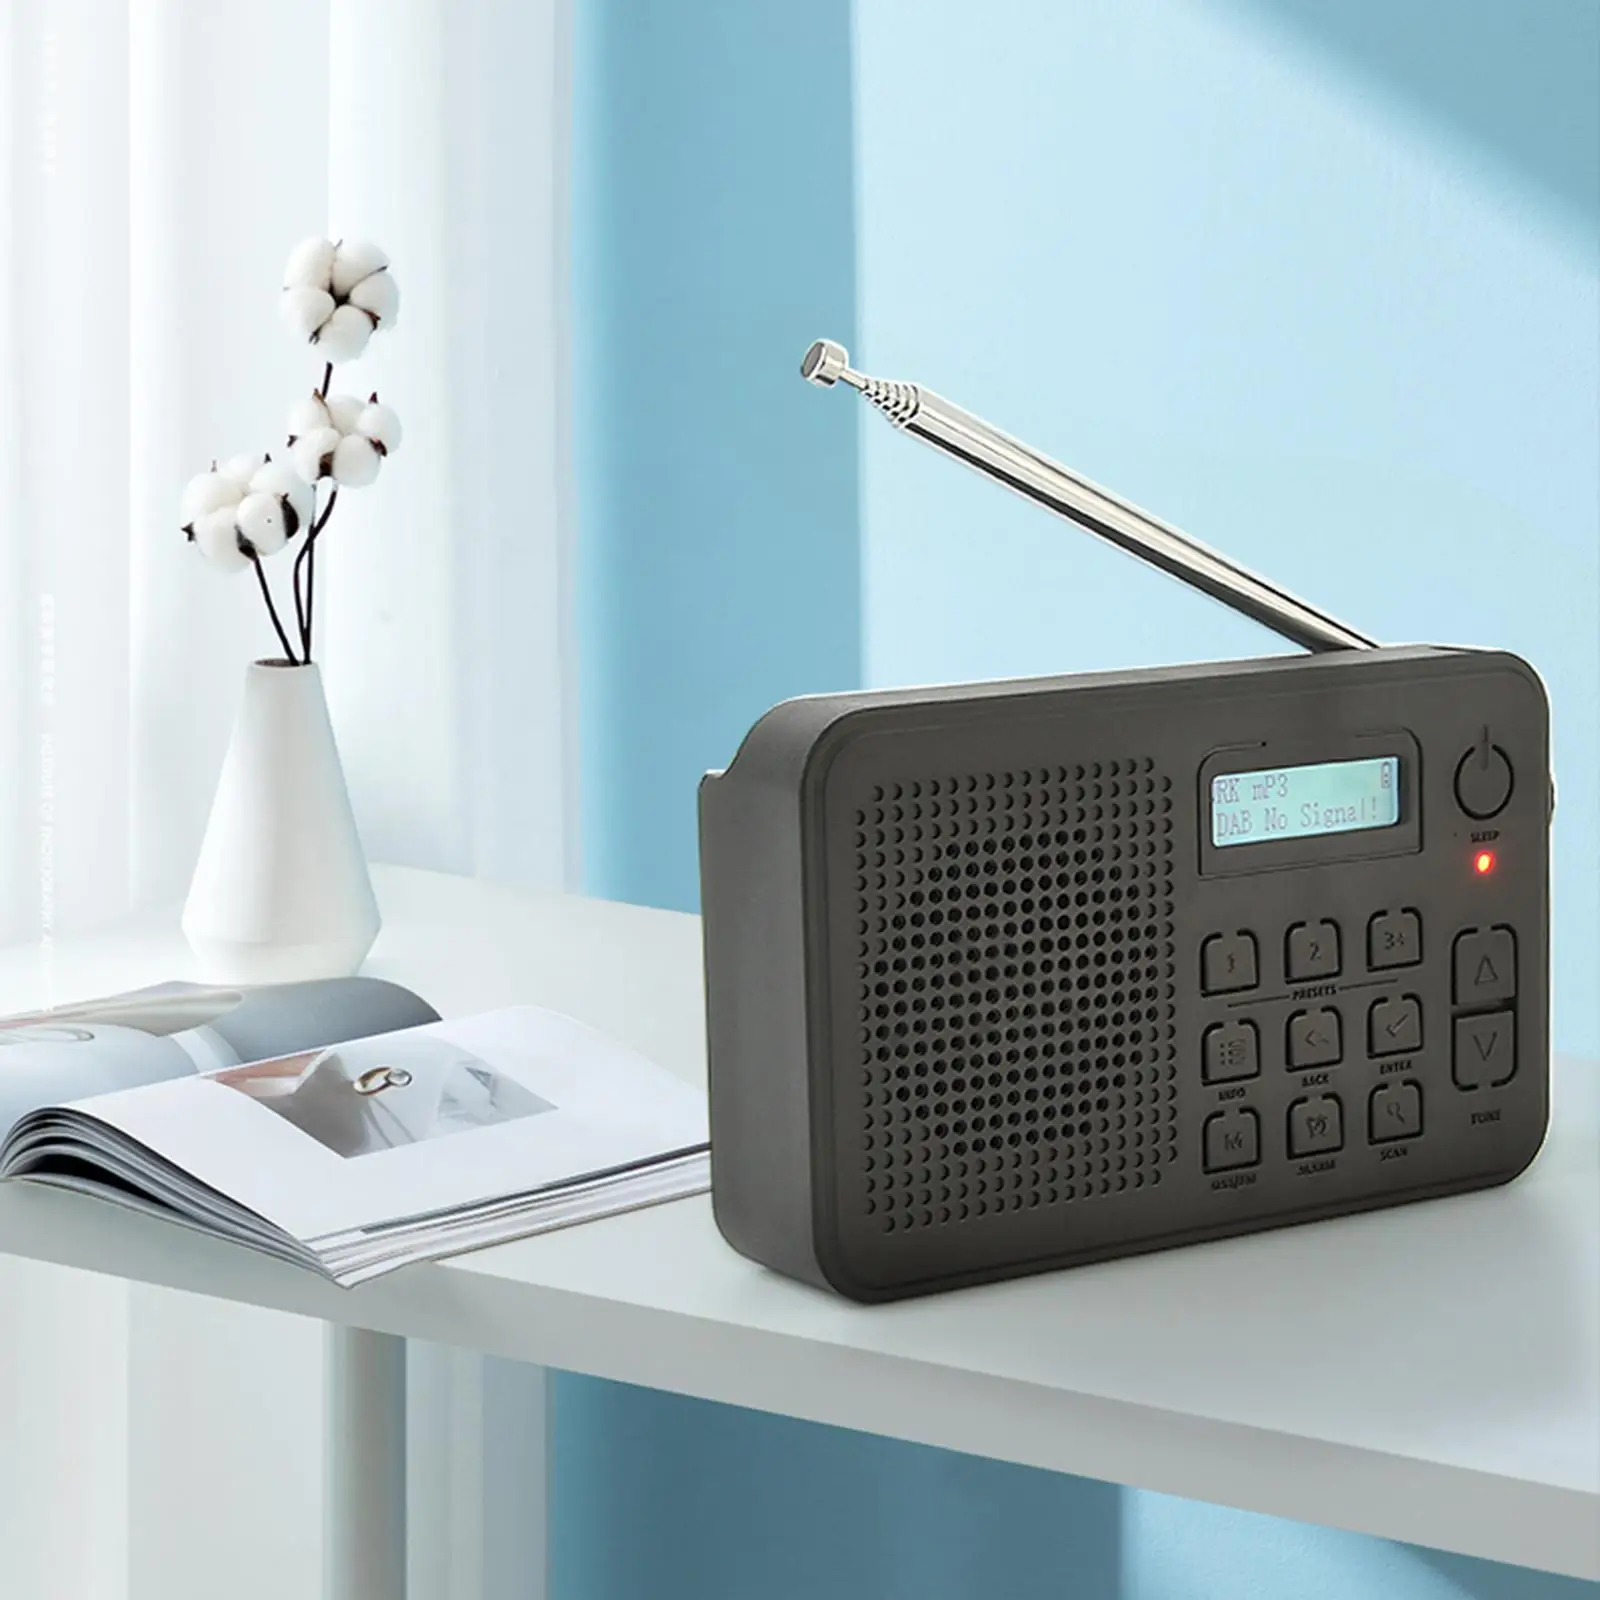 Digital Tuning DAB Digital Radio Gift with DAB and FM Receiver Built in Battery Handheld for Radio Receiving Outdoor Home Elder